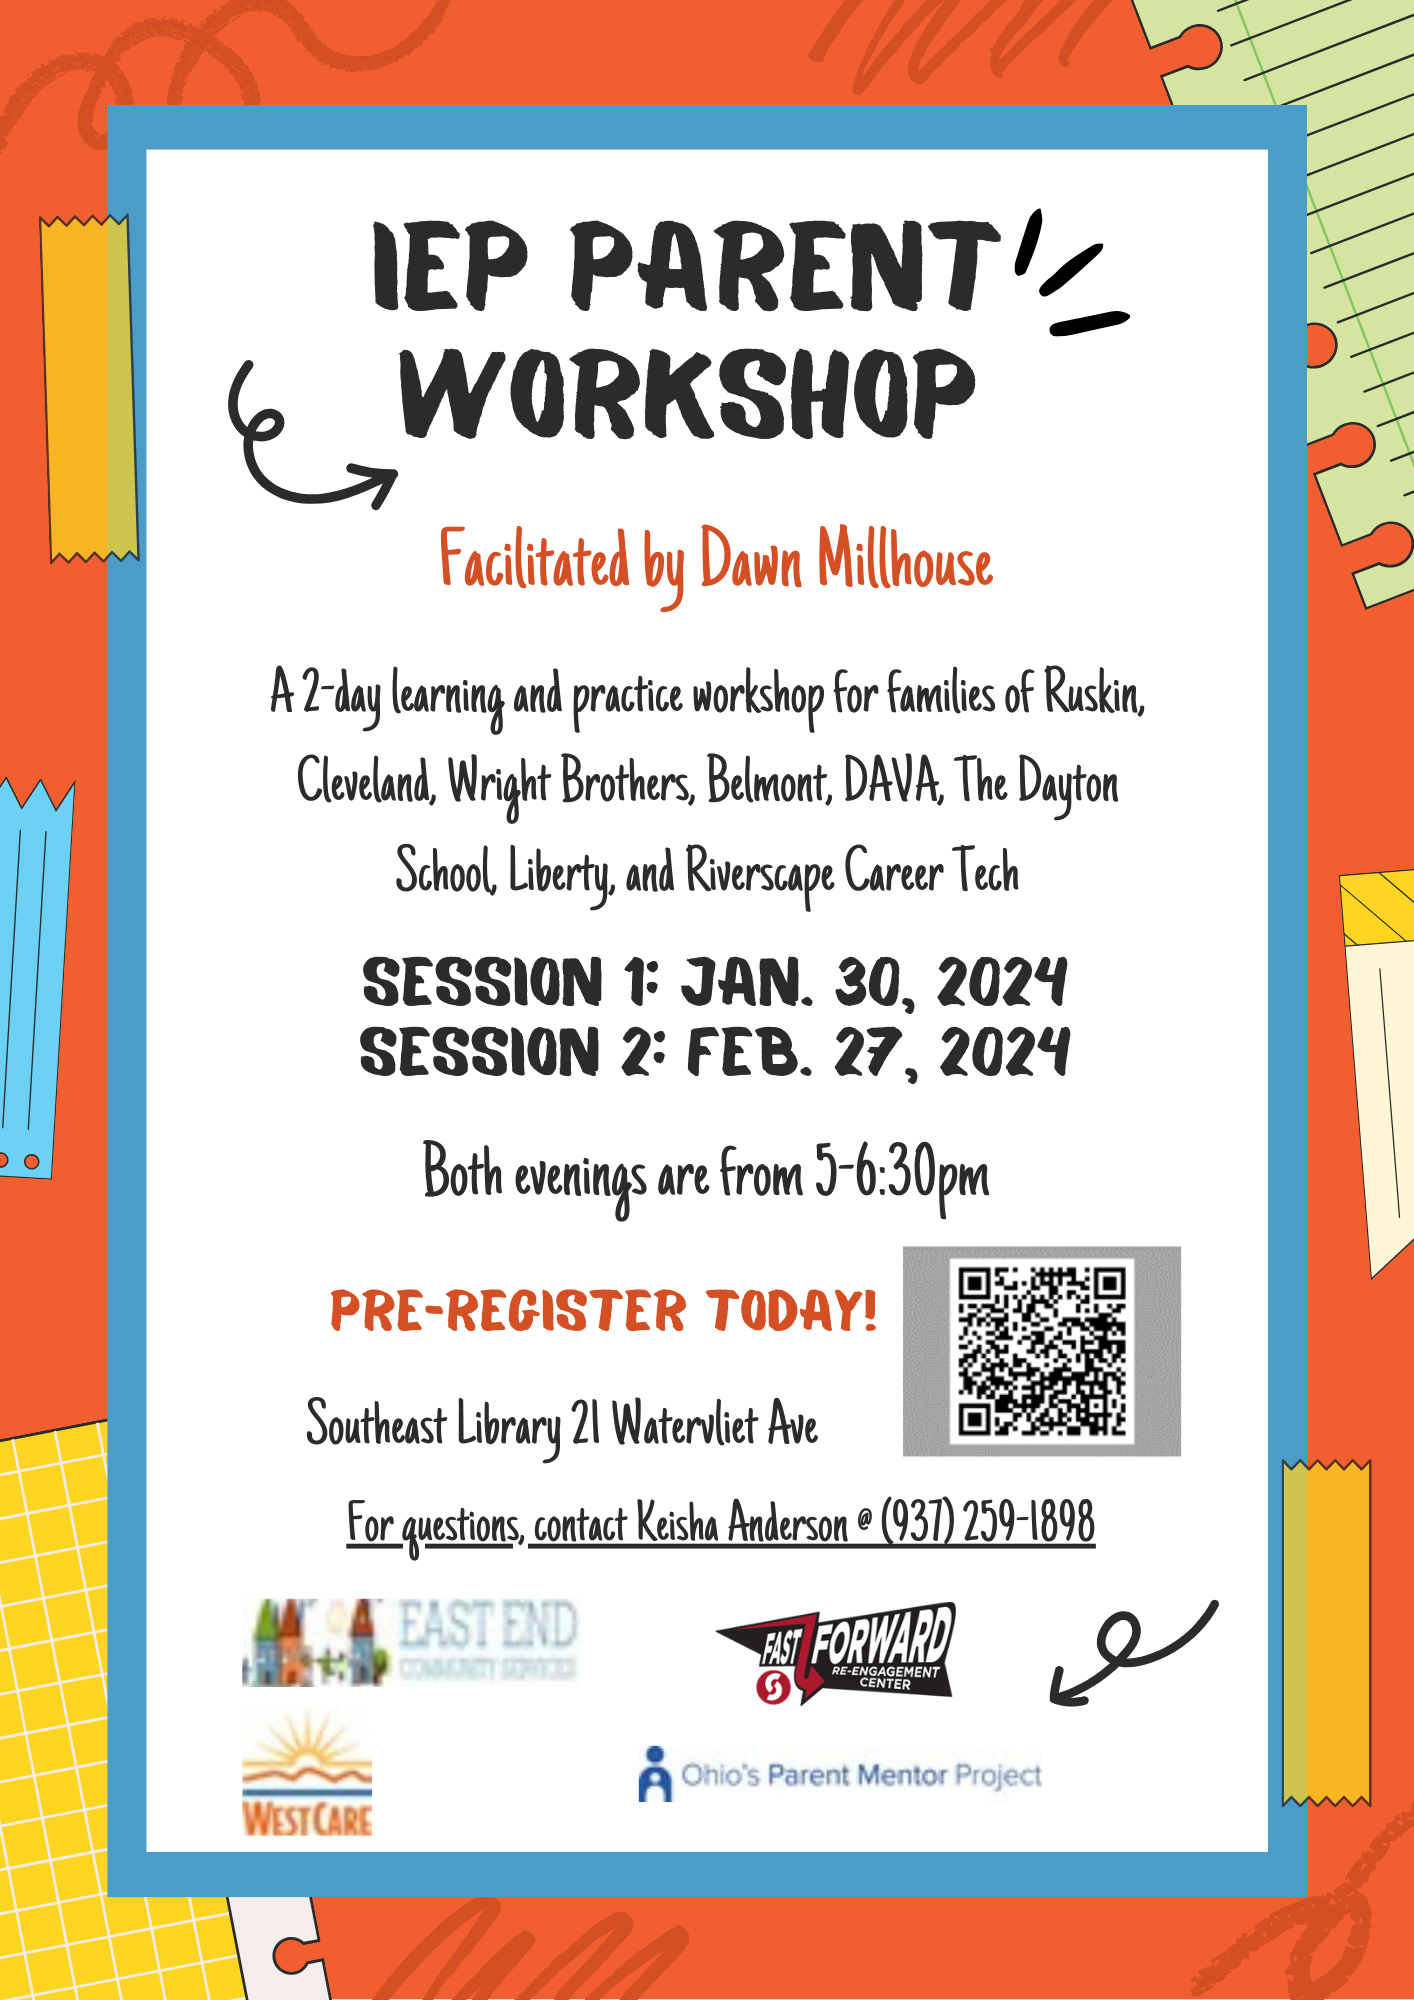 Join us for a Parent IEP workshop on 2/7/24 at the Southeast Library Branch from 5:00pm-6:30pm